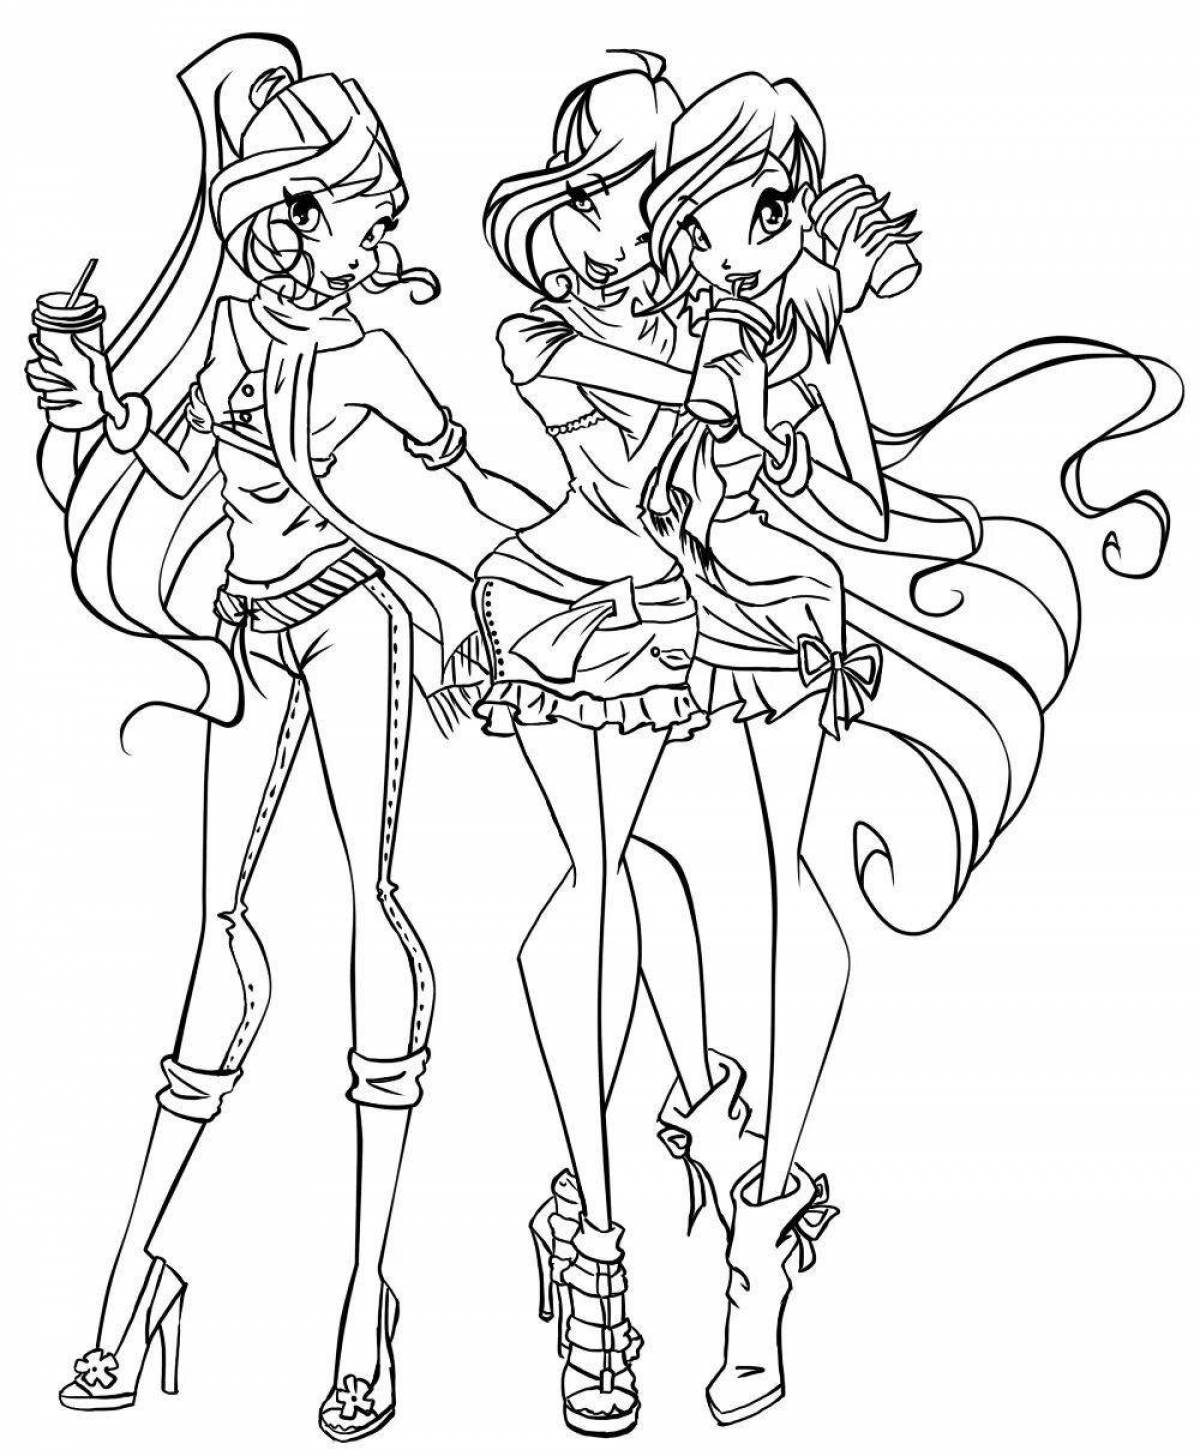 Cute winx coloring book for kids